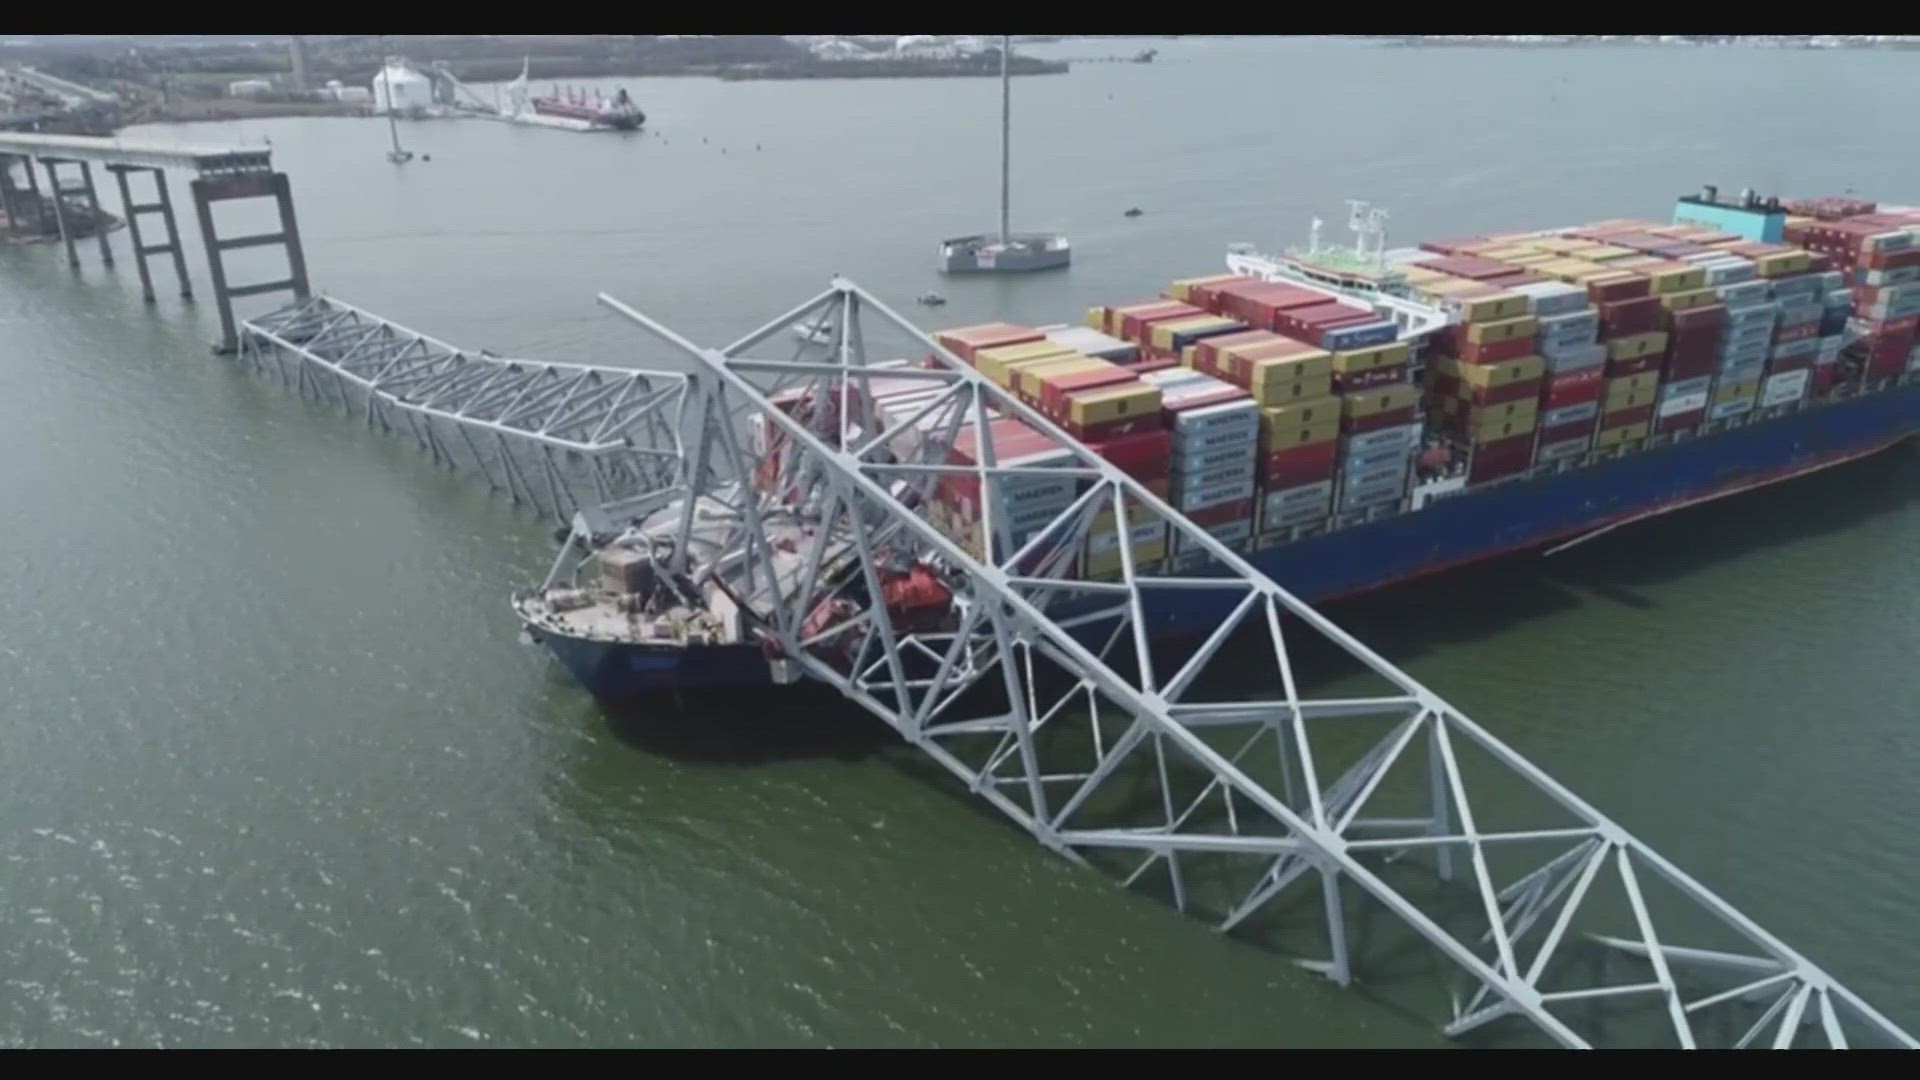 With the ship barreling toward the bridge, authorities had just enough time to stop cars from coming over the bridge, Maryland's governor said.